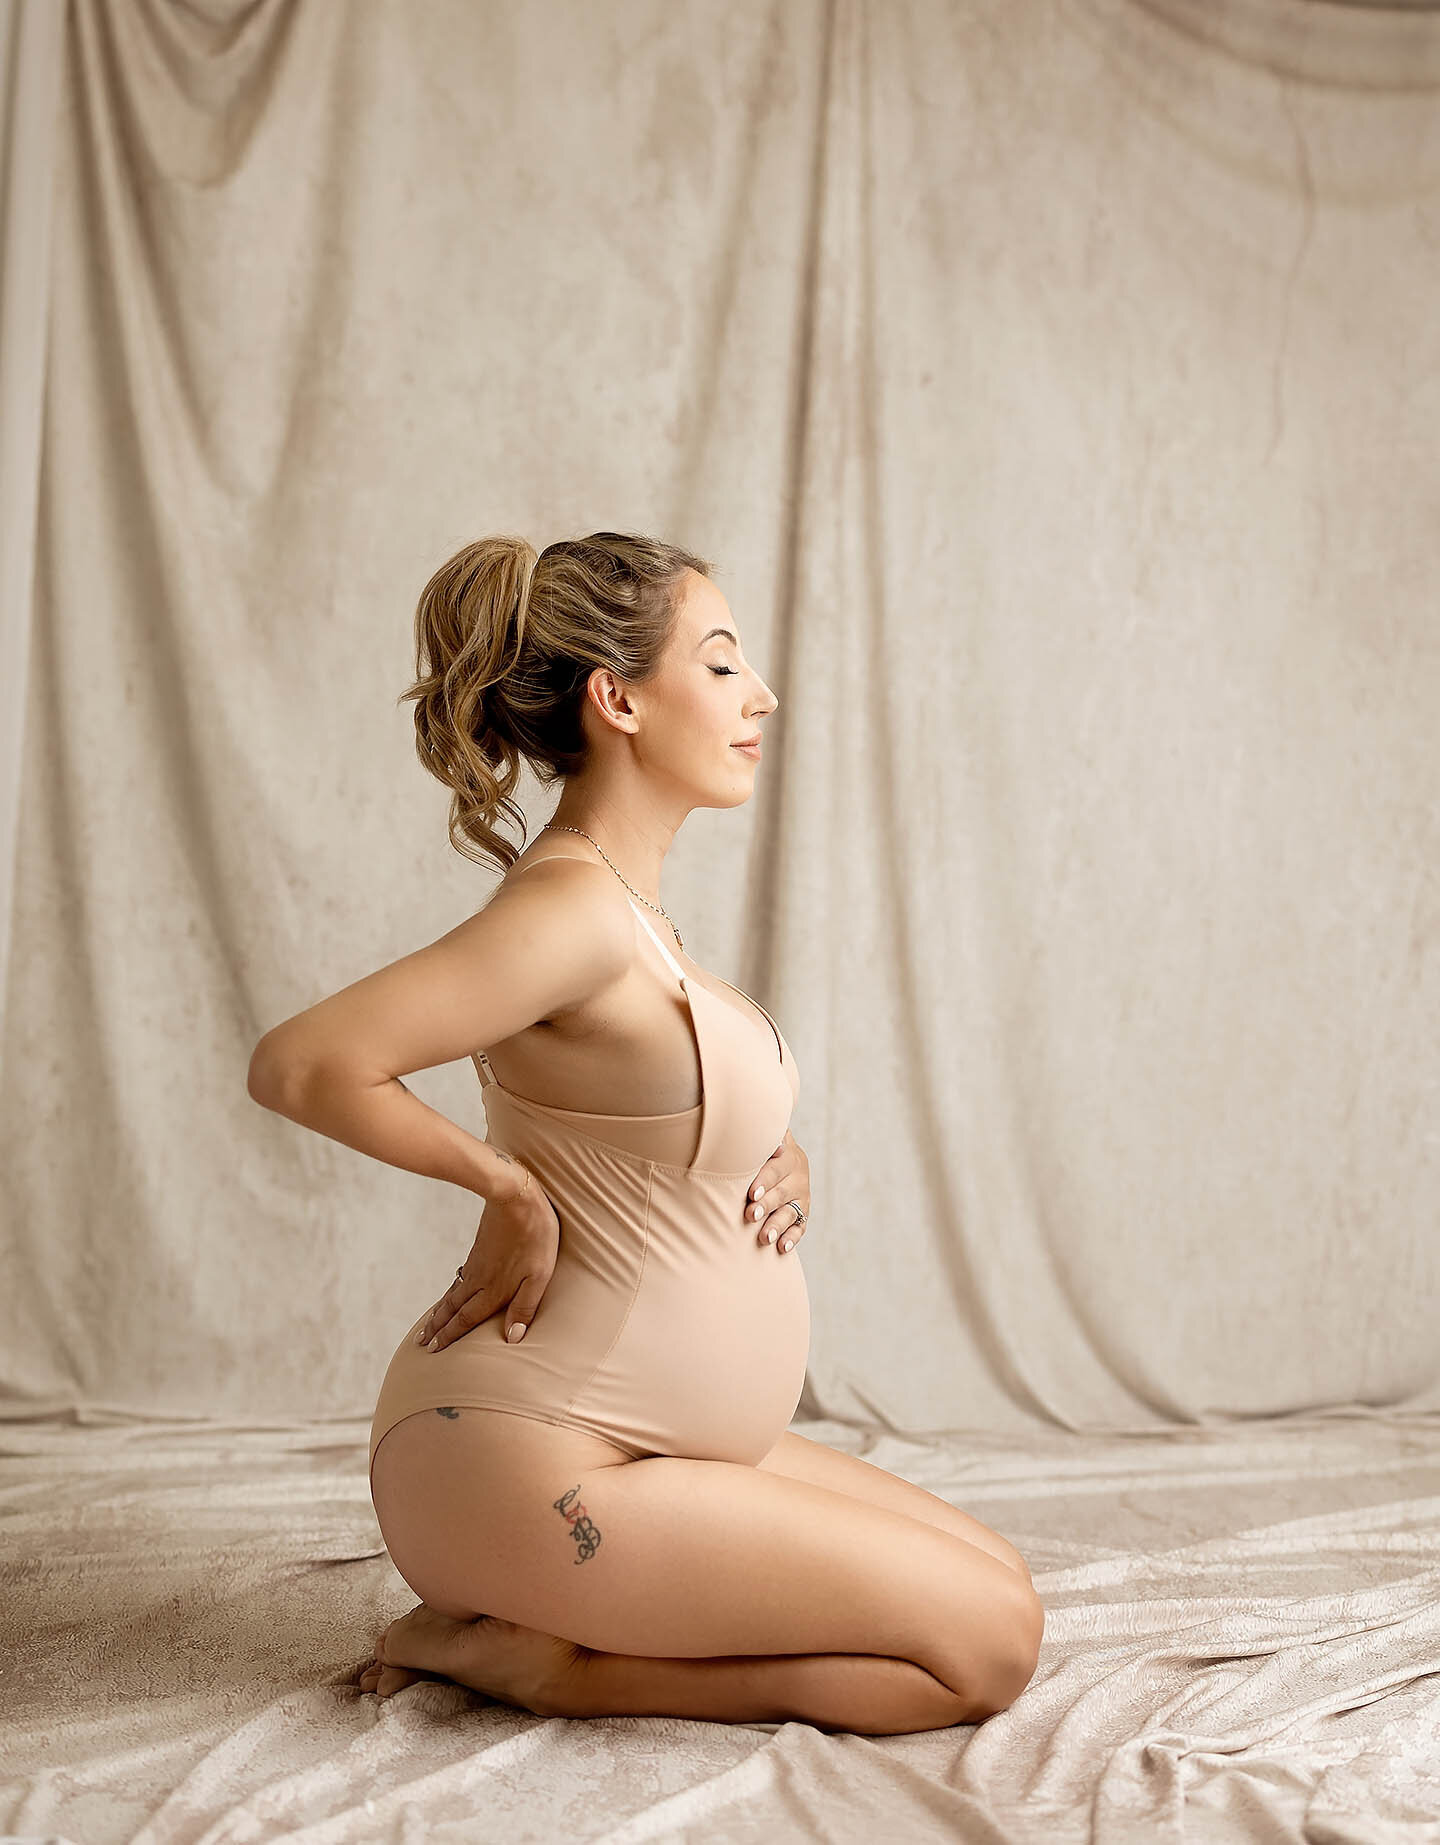 Vancouver Photography studio captures a maternity image of a blonde women sitting down